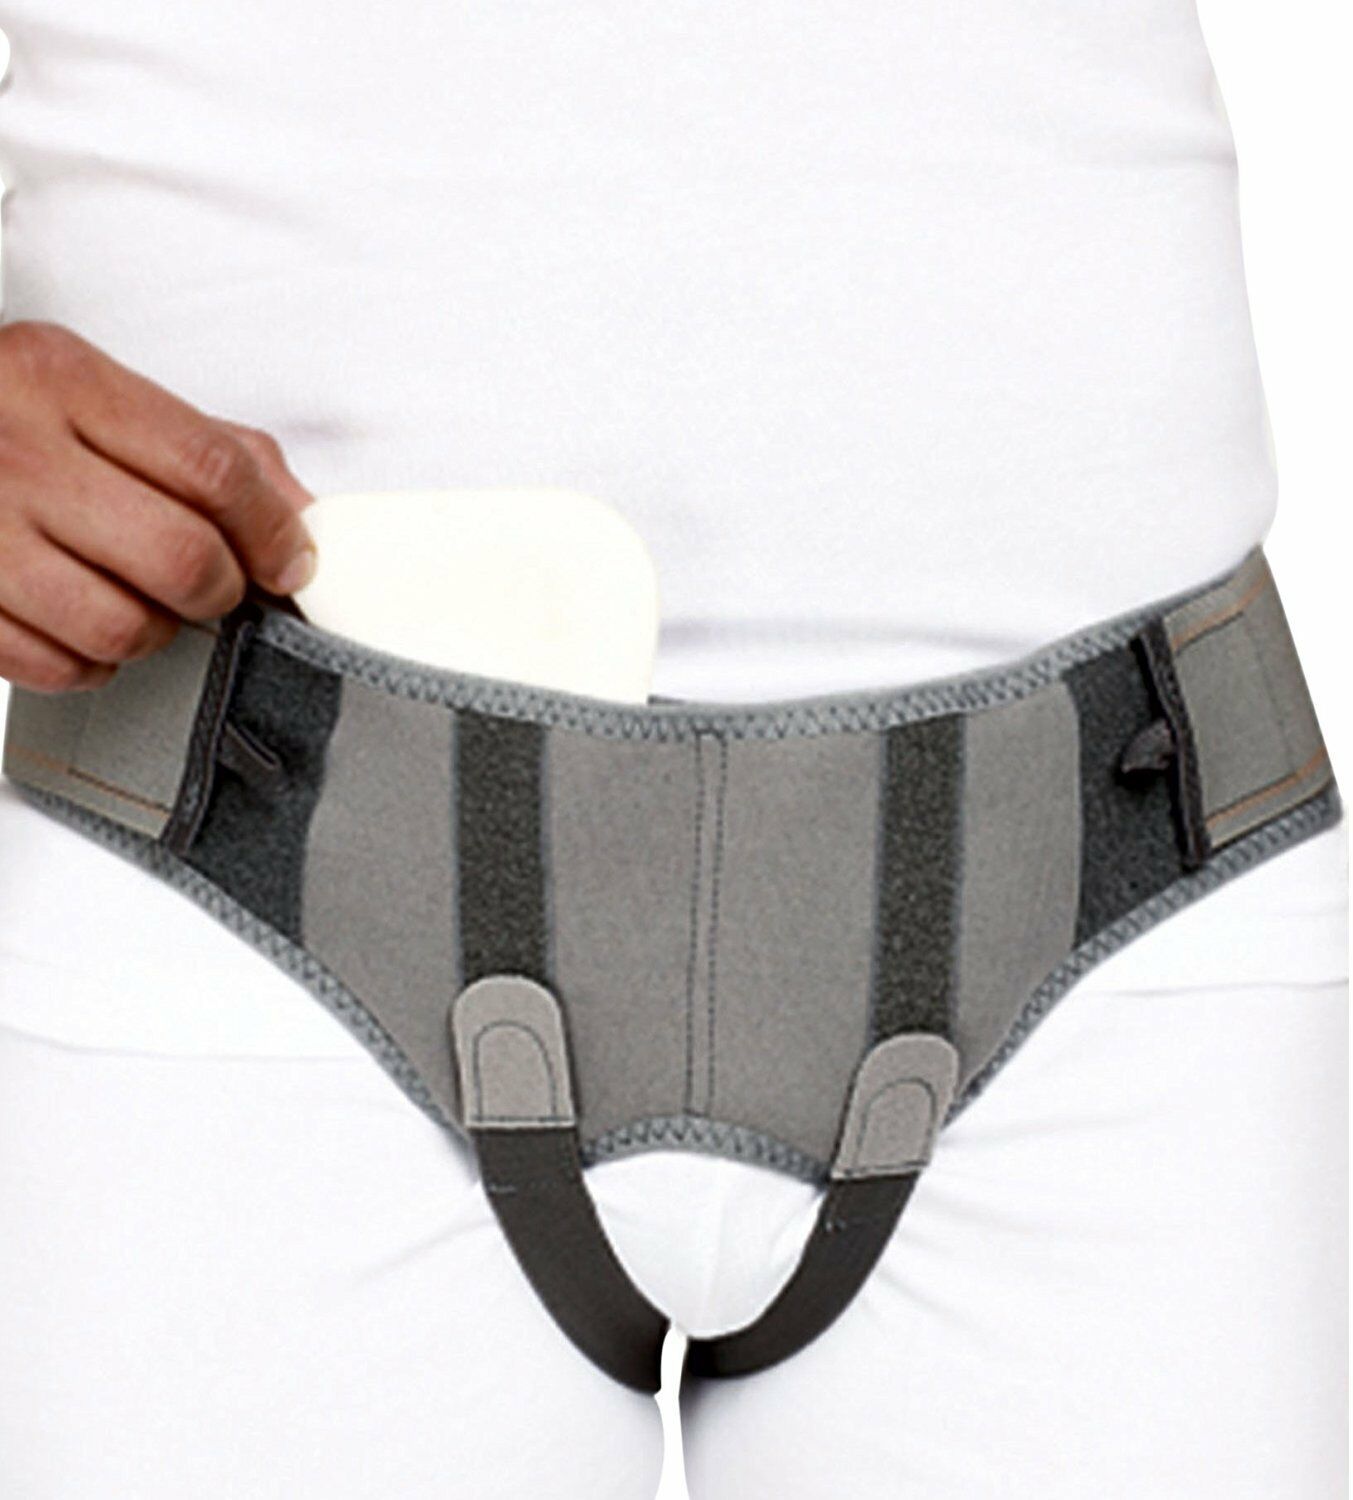 TYNOR Hernia Belt A16 LARGE Size (36-40 inches) (90-100cm) | Free Shipping - $14.95